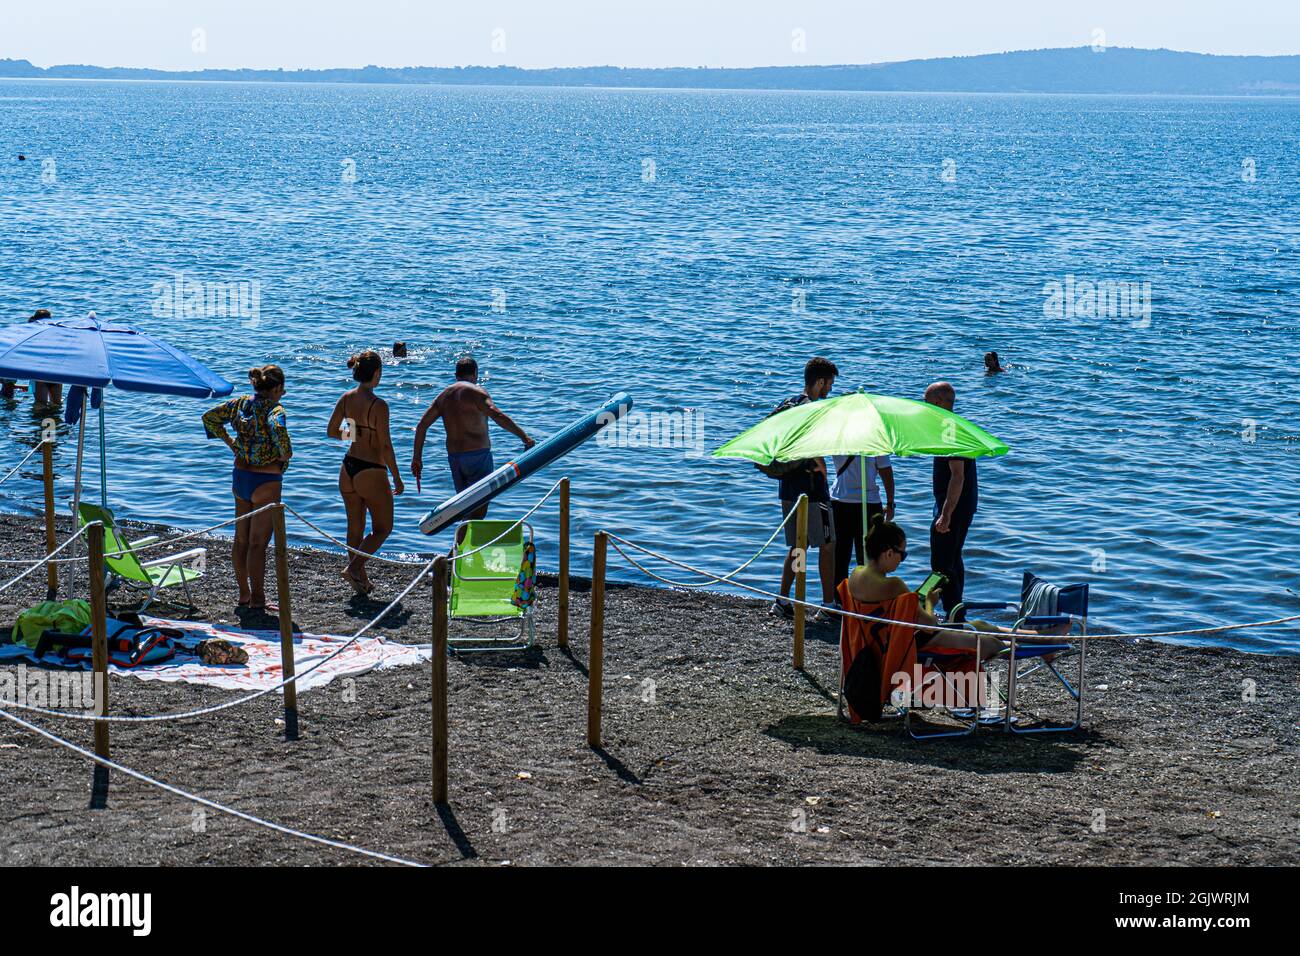 TREVIGNANO ROMANO ITALY, UK. 12 September, 2021.  The beach is crowded with sunseekers on a hot day on lake Bracciano as families and people come up for the weekend from Rome to the tourist resort of Trevignano Romano to enjoy the sunshine as temperatures remain high in September. Credit: amer ghazzal/Alamy Live News Stock Photo